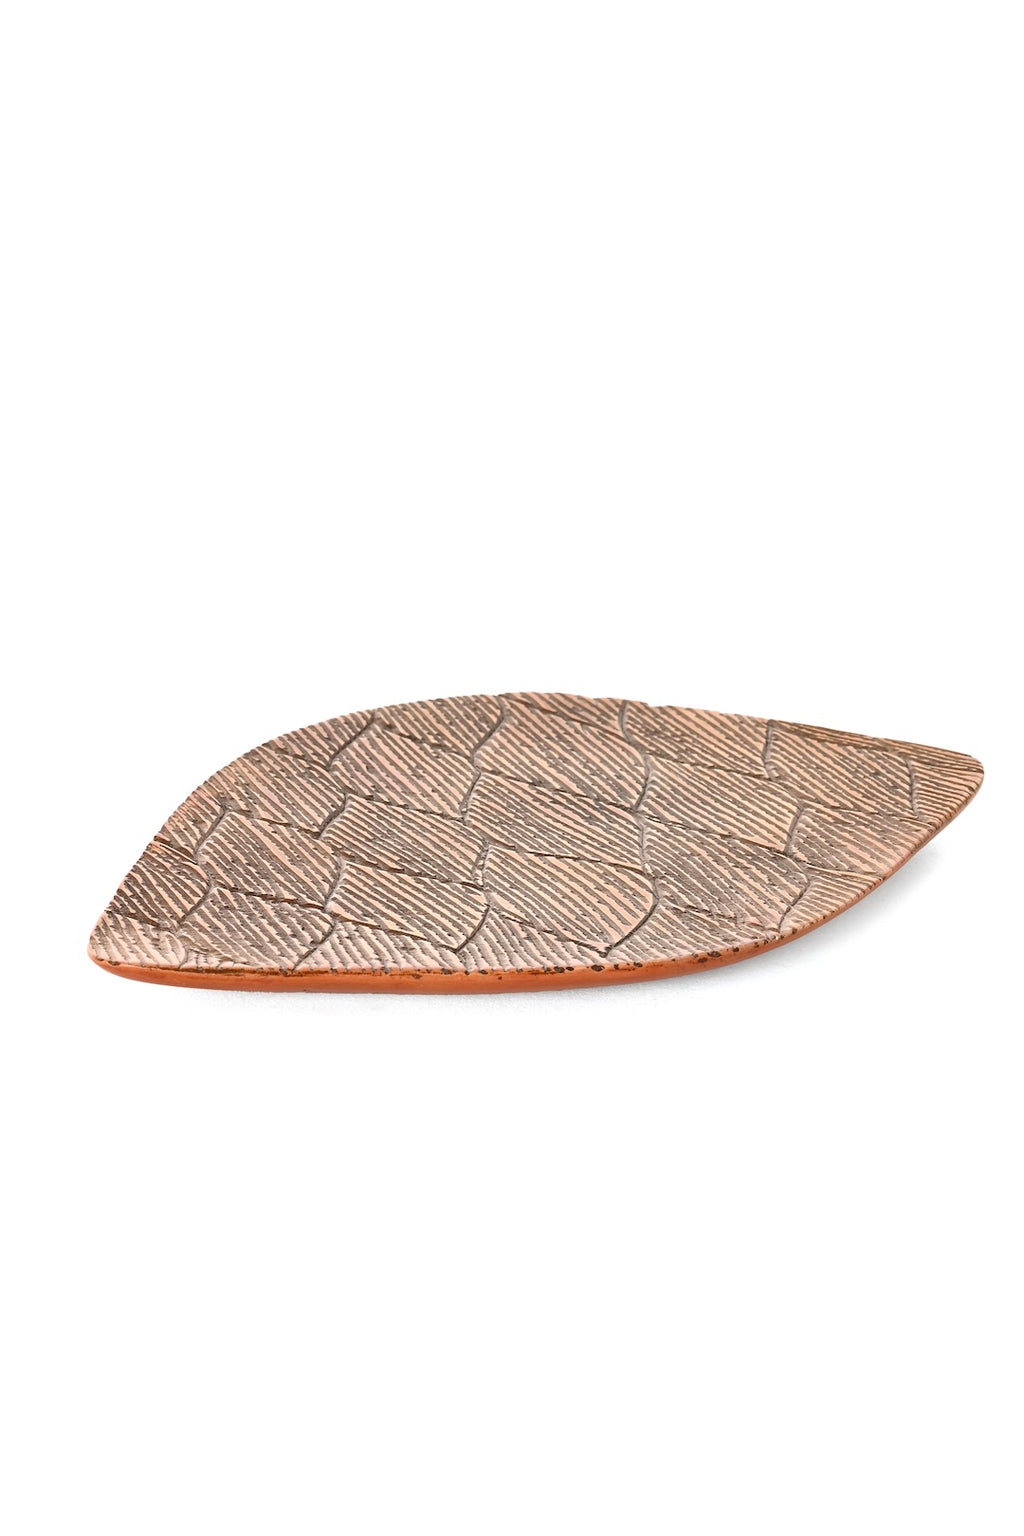 Etched Leaves Soapstone Dish